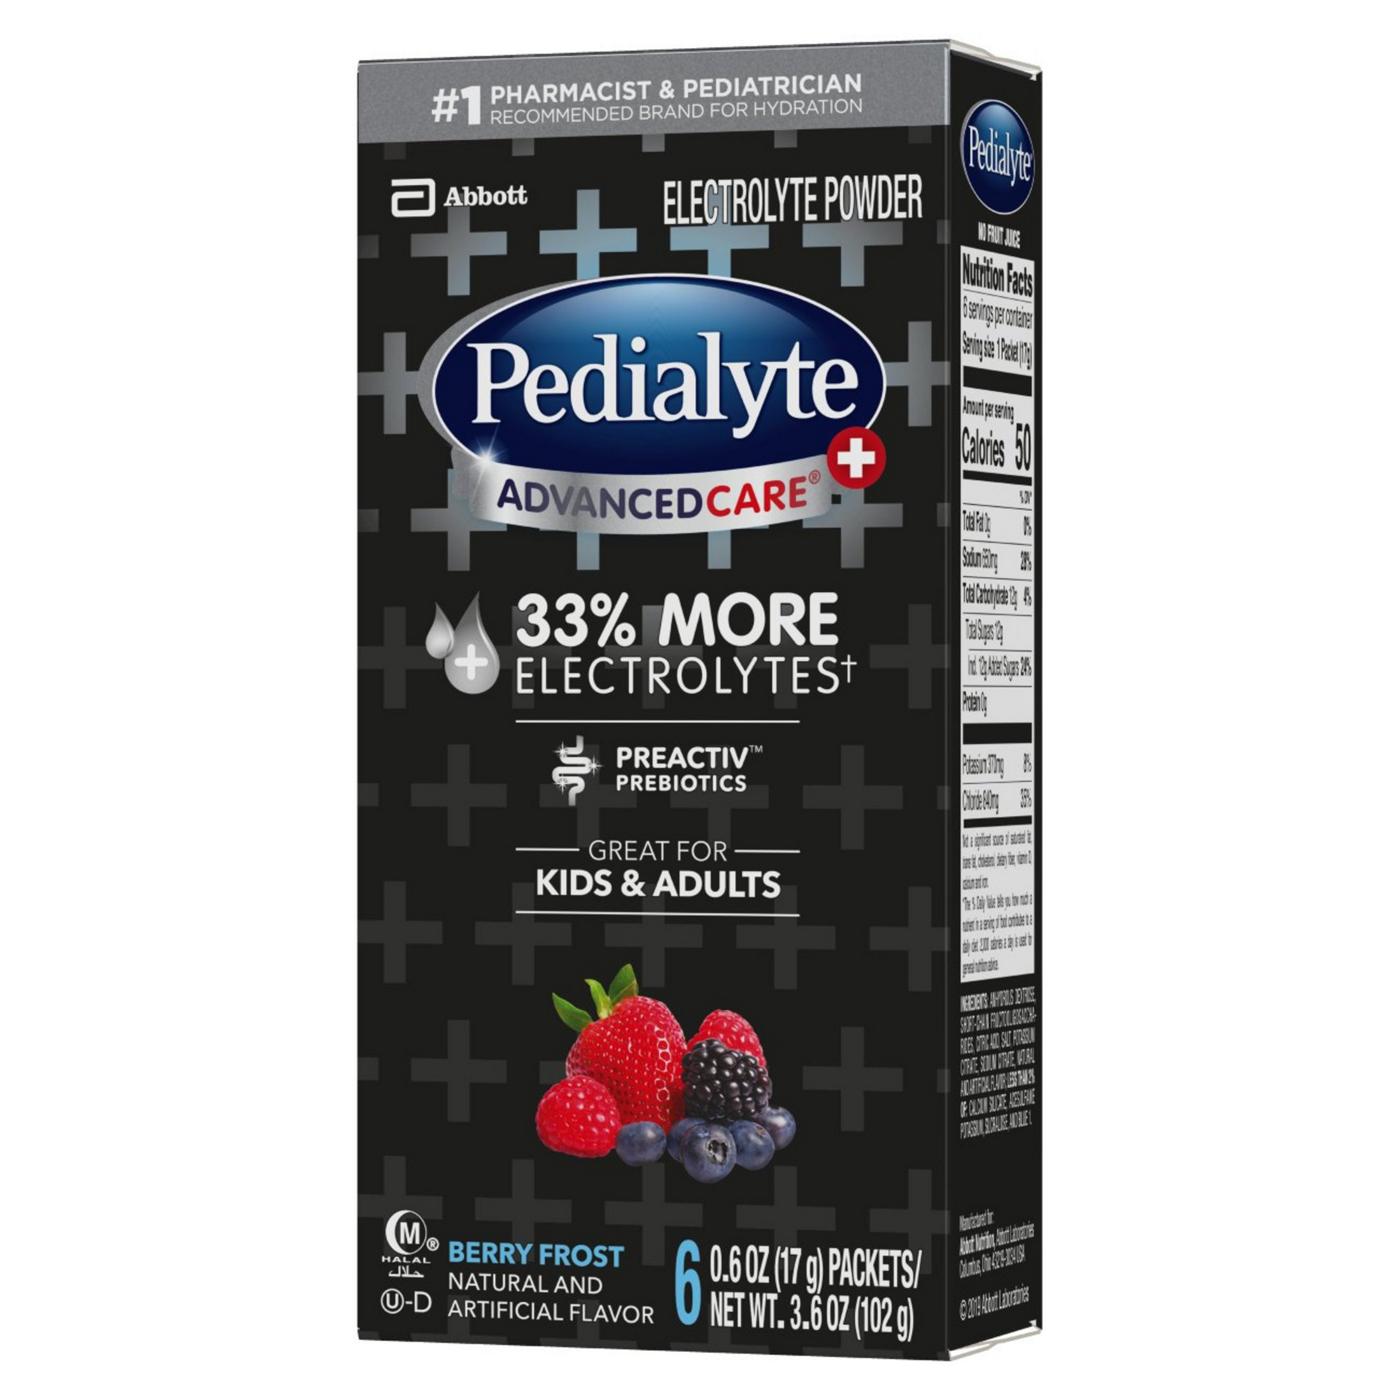 Pedialyte AdvancedCare Plus Electrolyte Powder Packs - Berry Frost; image 4 of 7